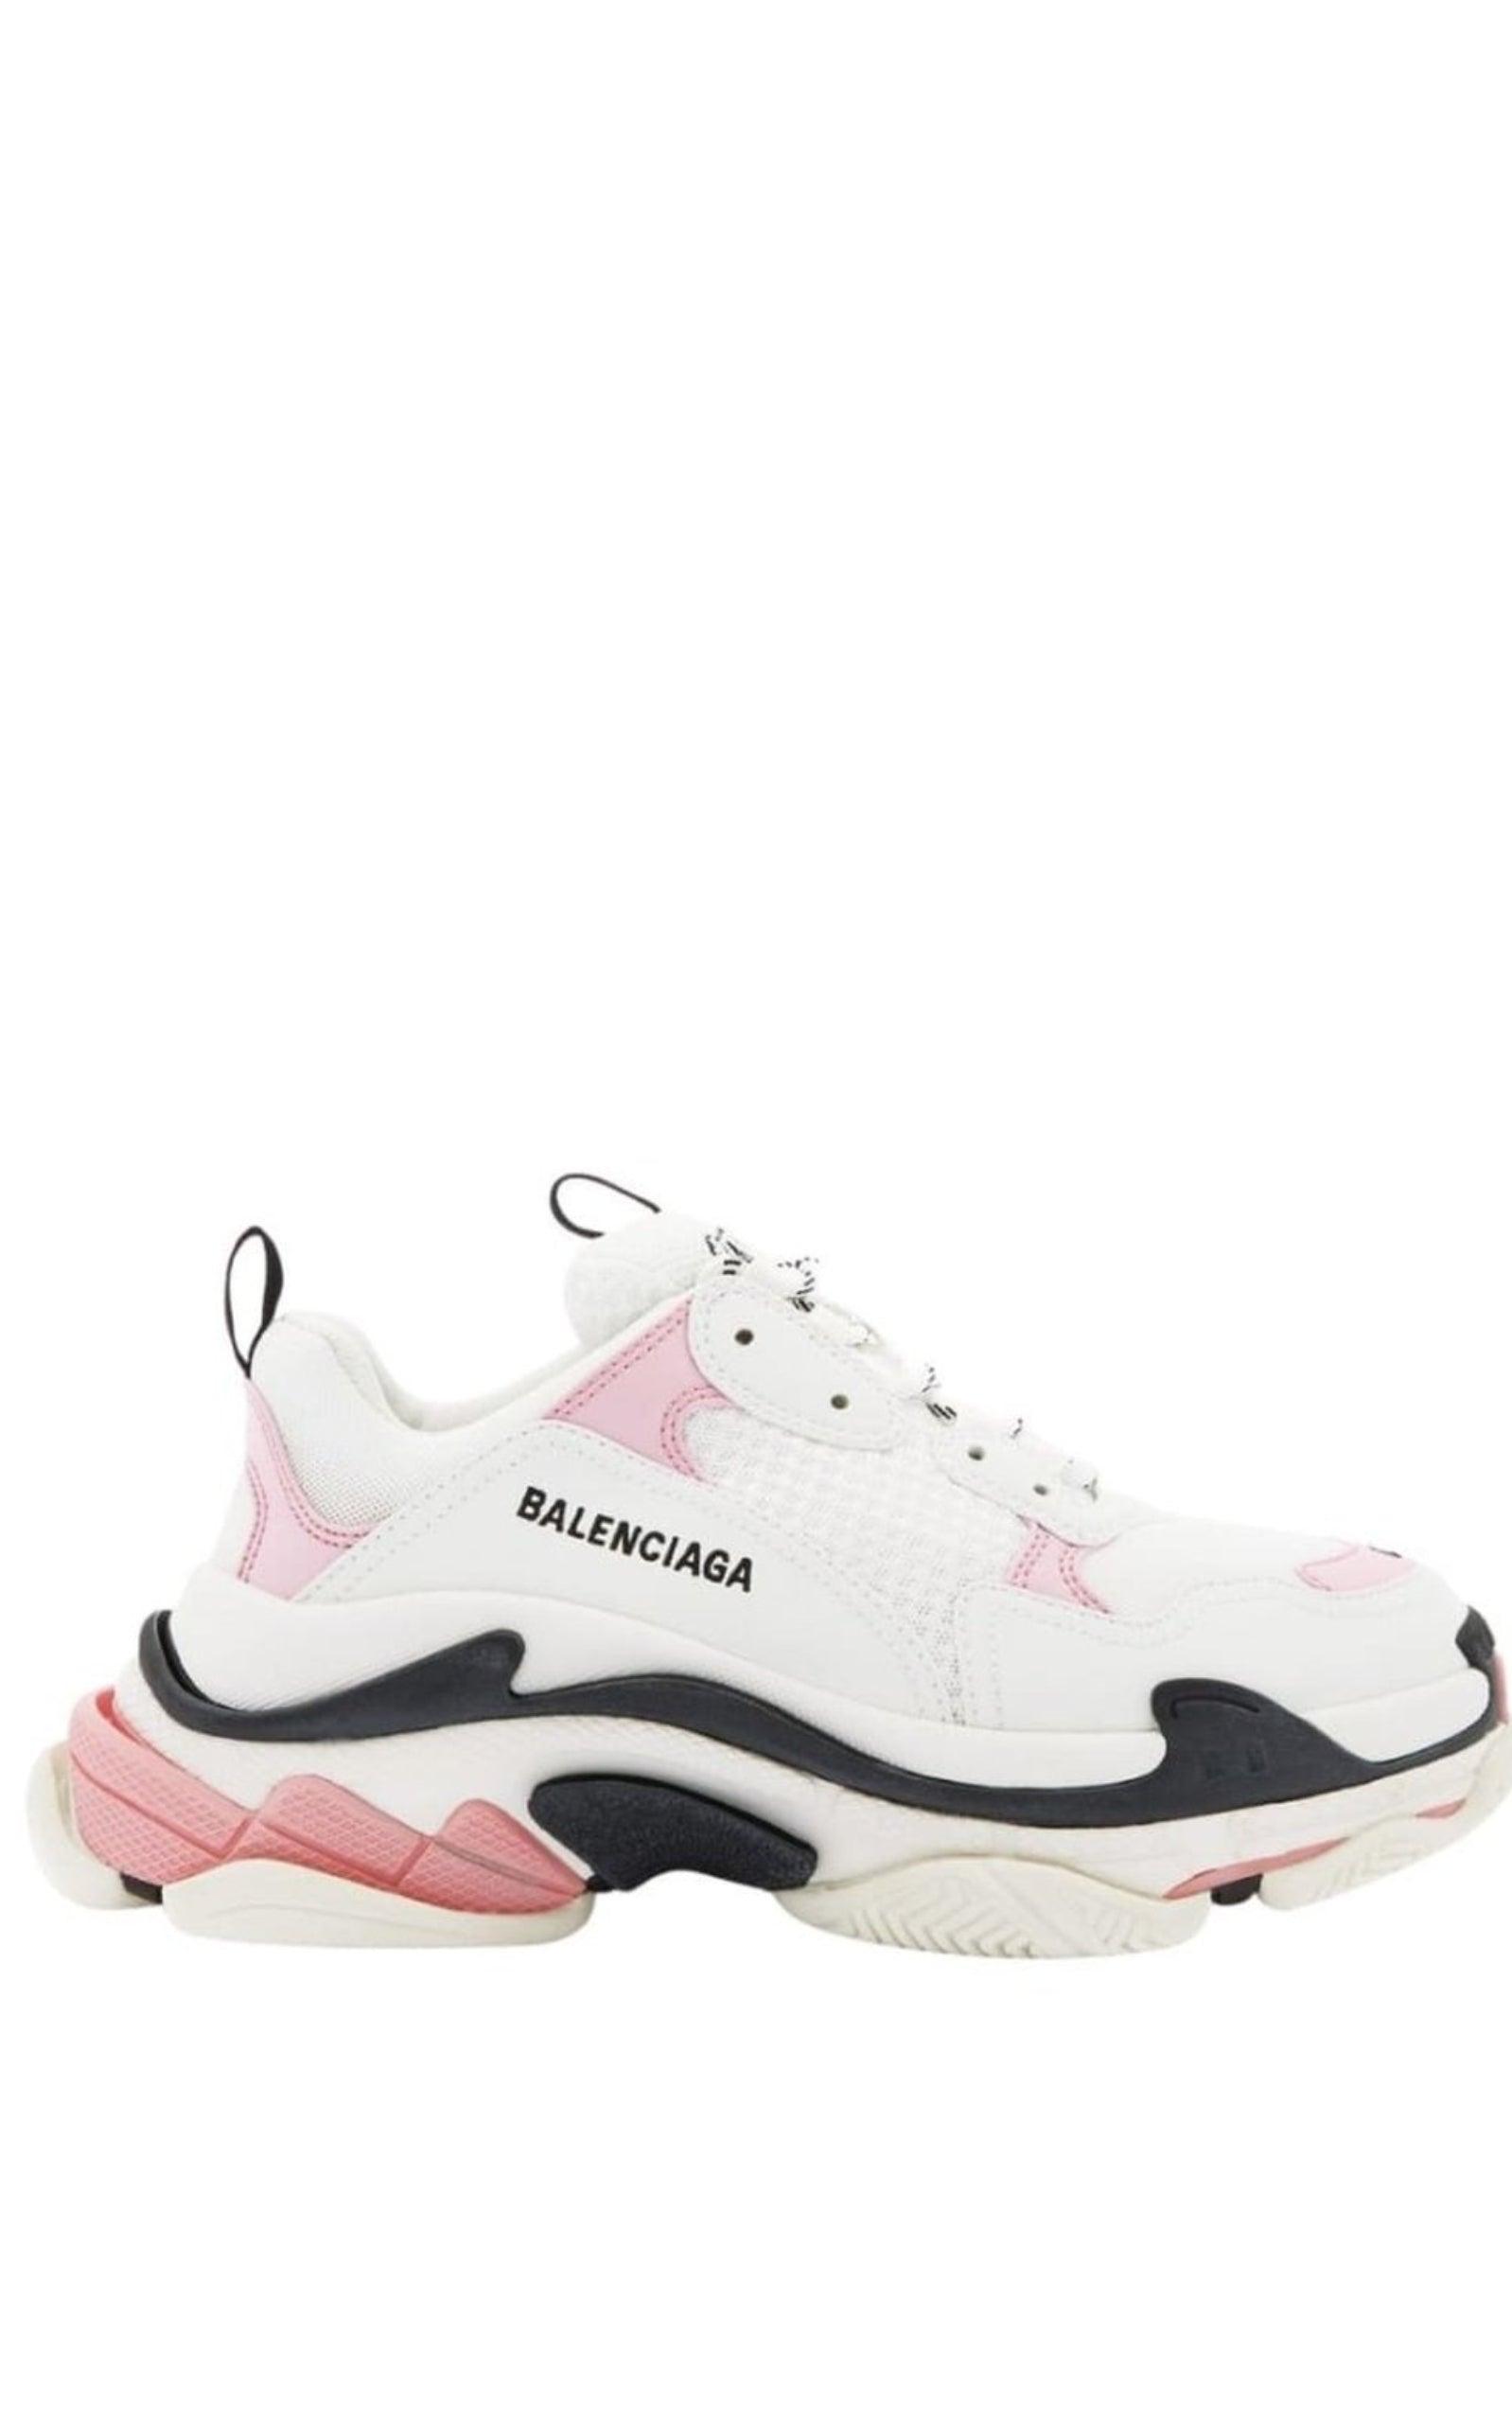 Bred vifte Ærlighed Staple Balenciaga Triple S leather and Mesh Sneakers | Runway Catalog